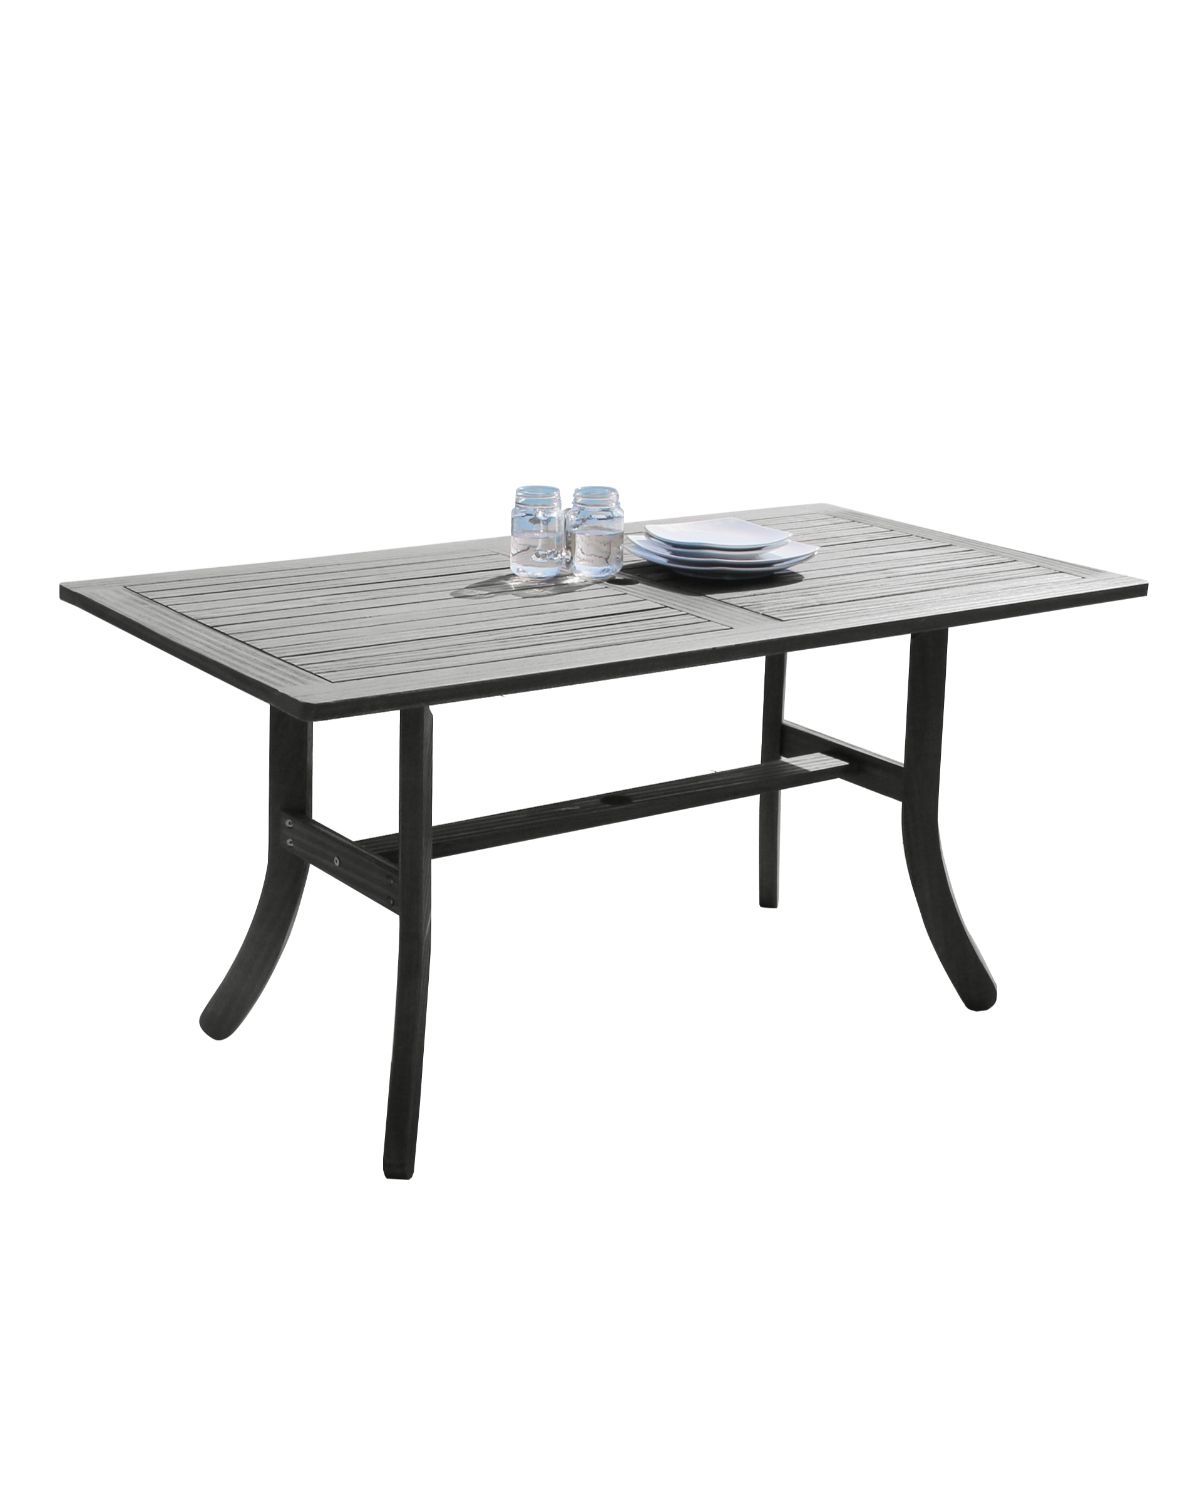 7-Piece Gray Hand Scraped Wood Finish Table Outdoor Furniture Patio Dining Set with Curvy Leg Table 59" - image 4 of 8